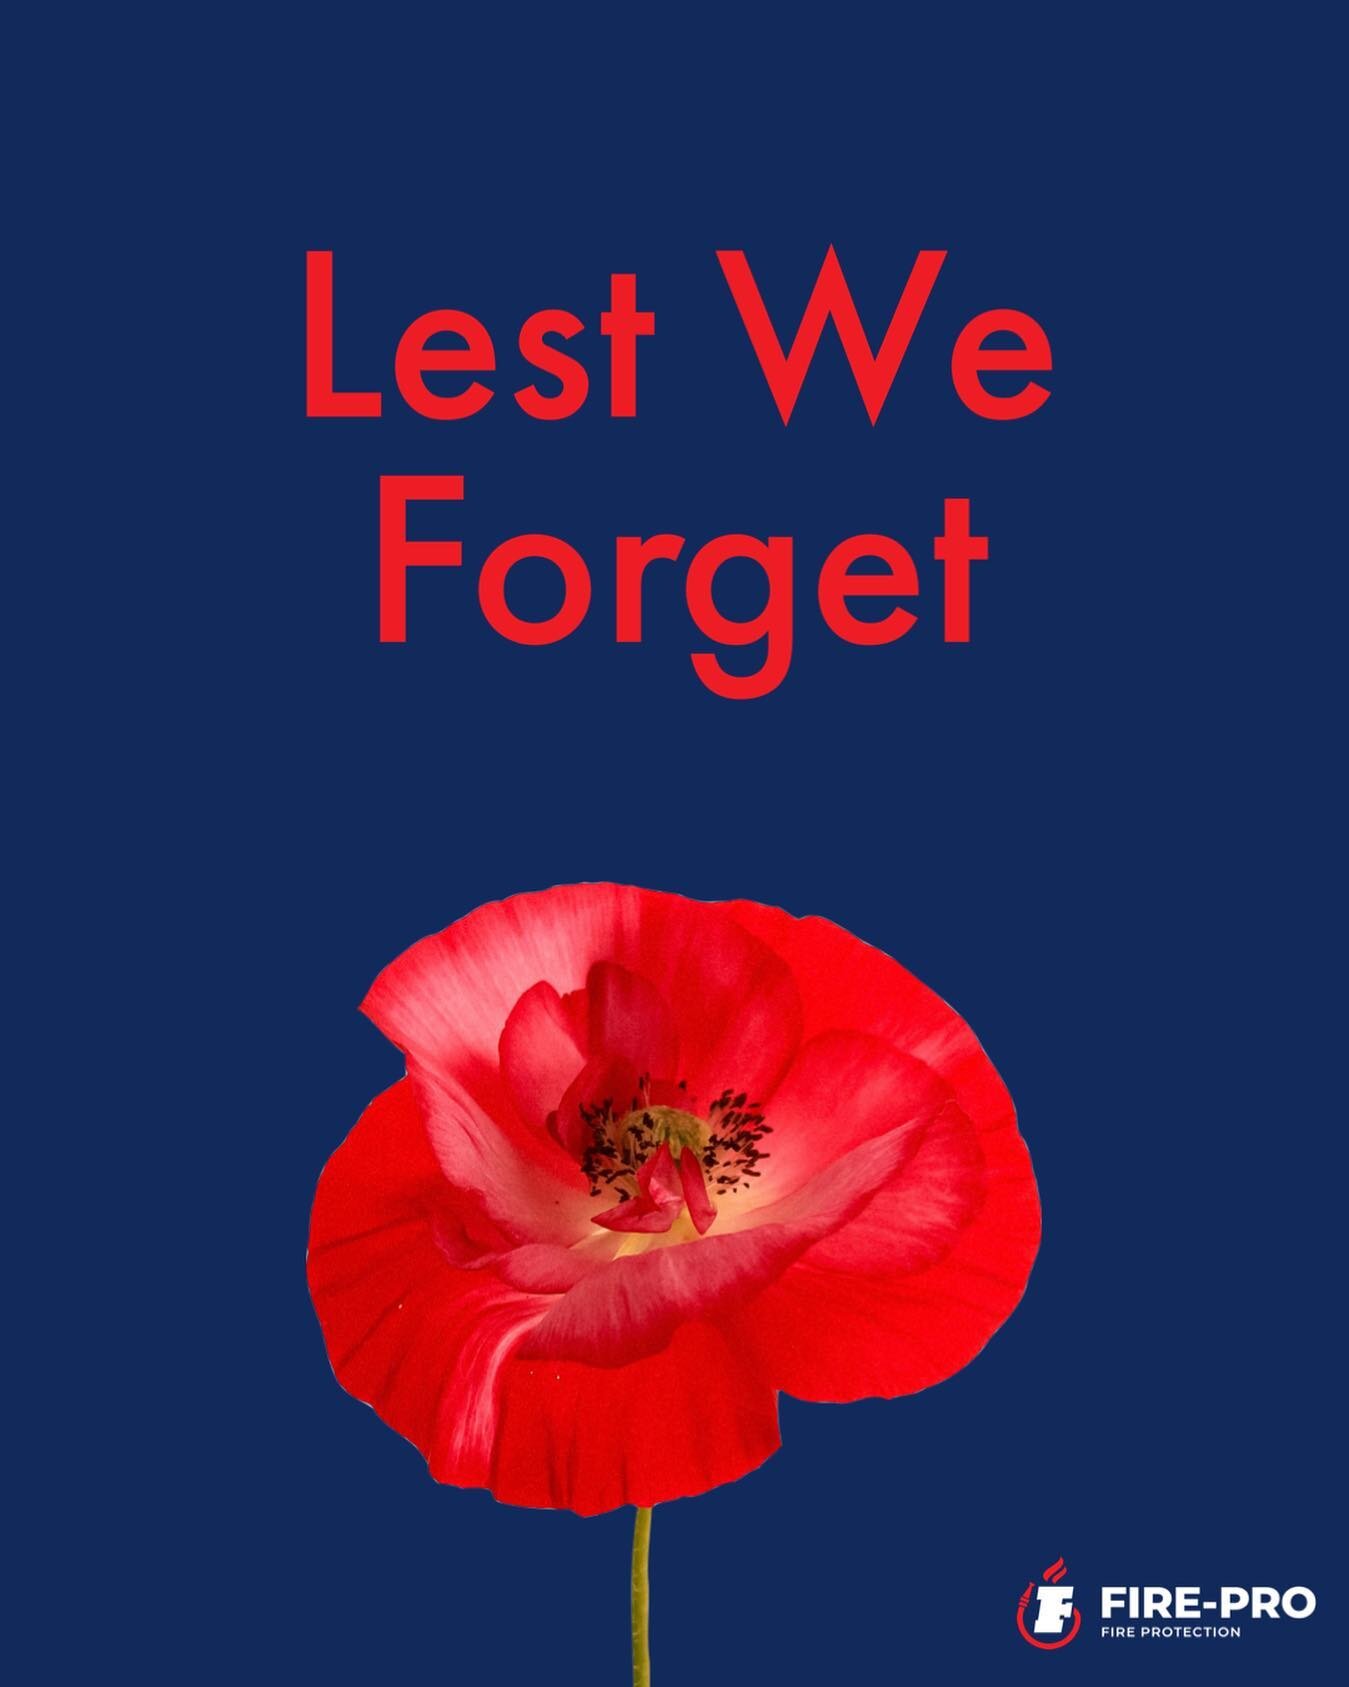 Lest We Forget.

Our offices will be closed on November 11th for Remembrance Day. 

Emergency service is available 24/7 at 604-299-1030.